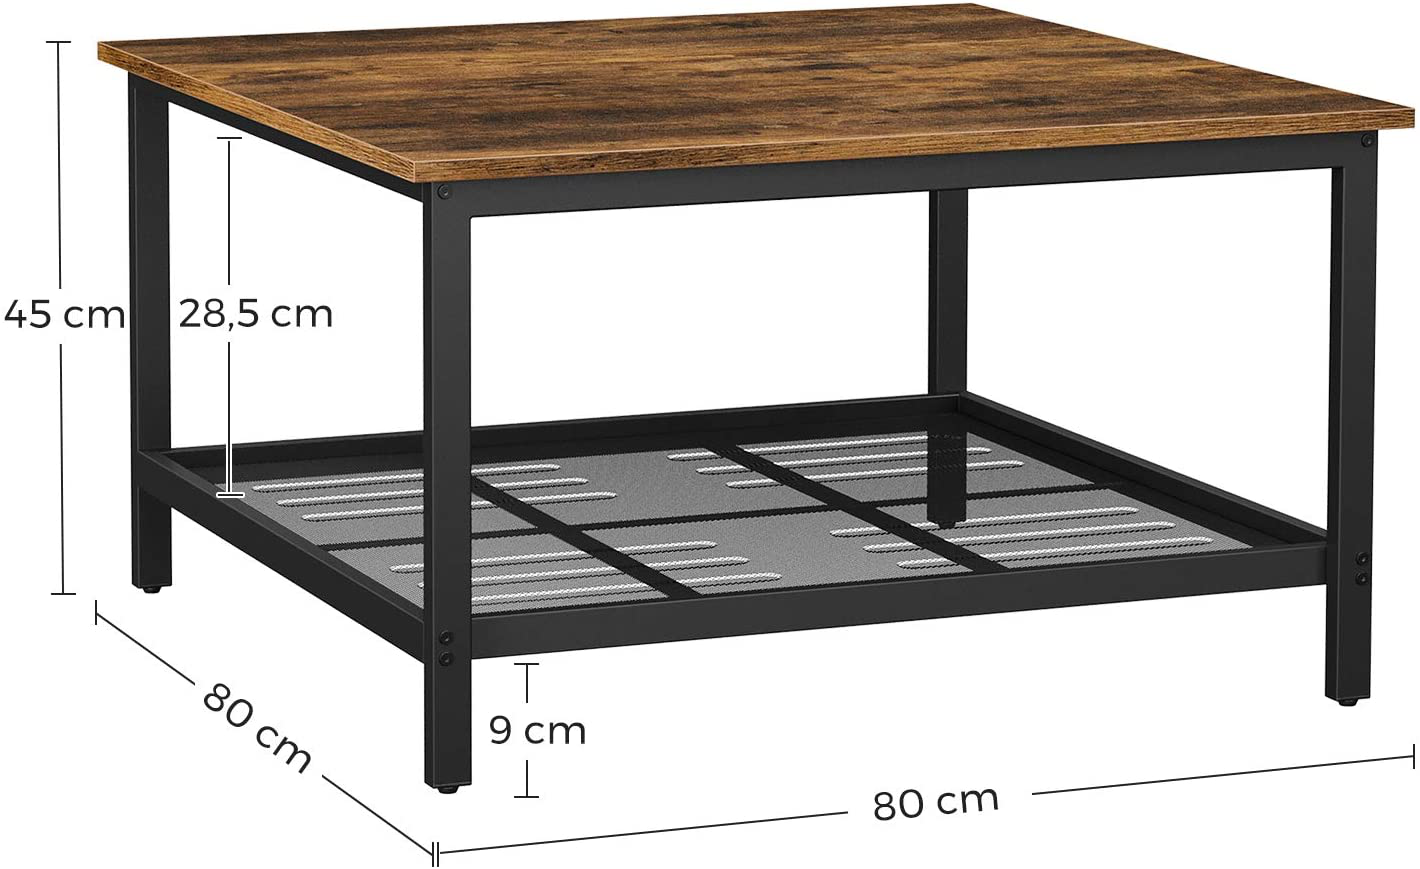 Rena Square Coffee Table with Spacious Table Top